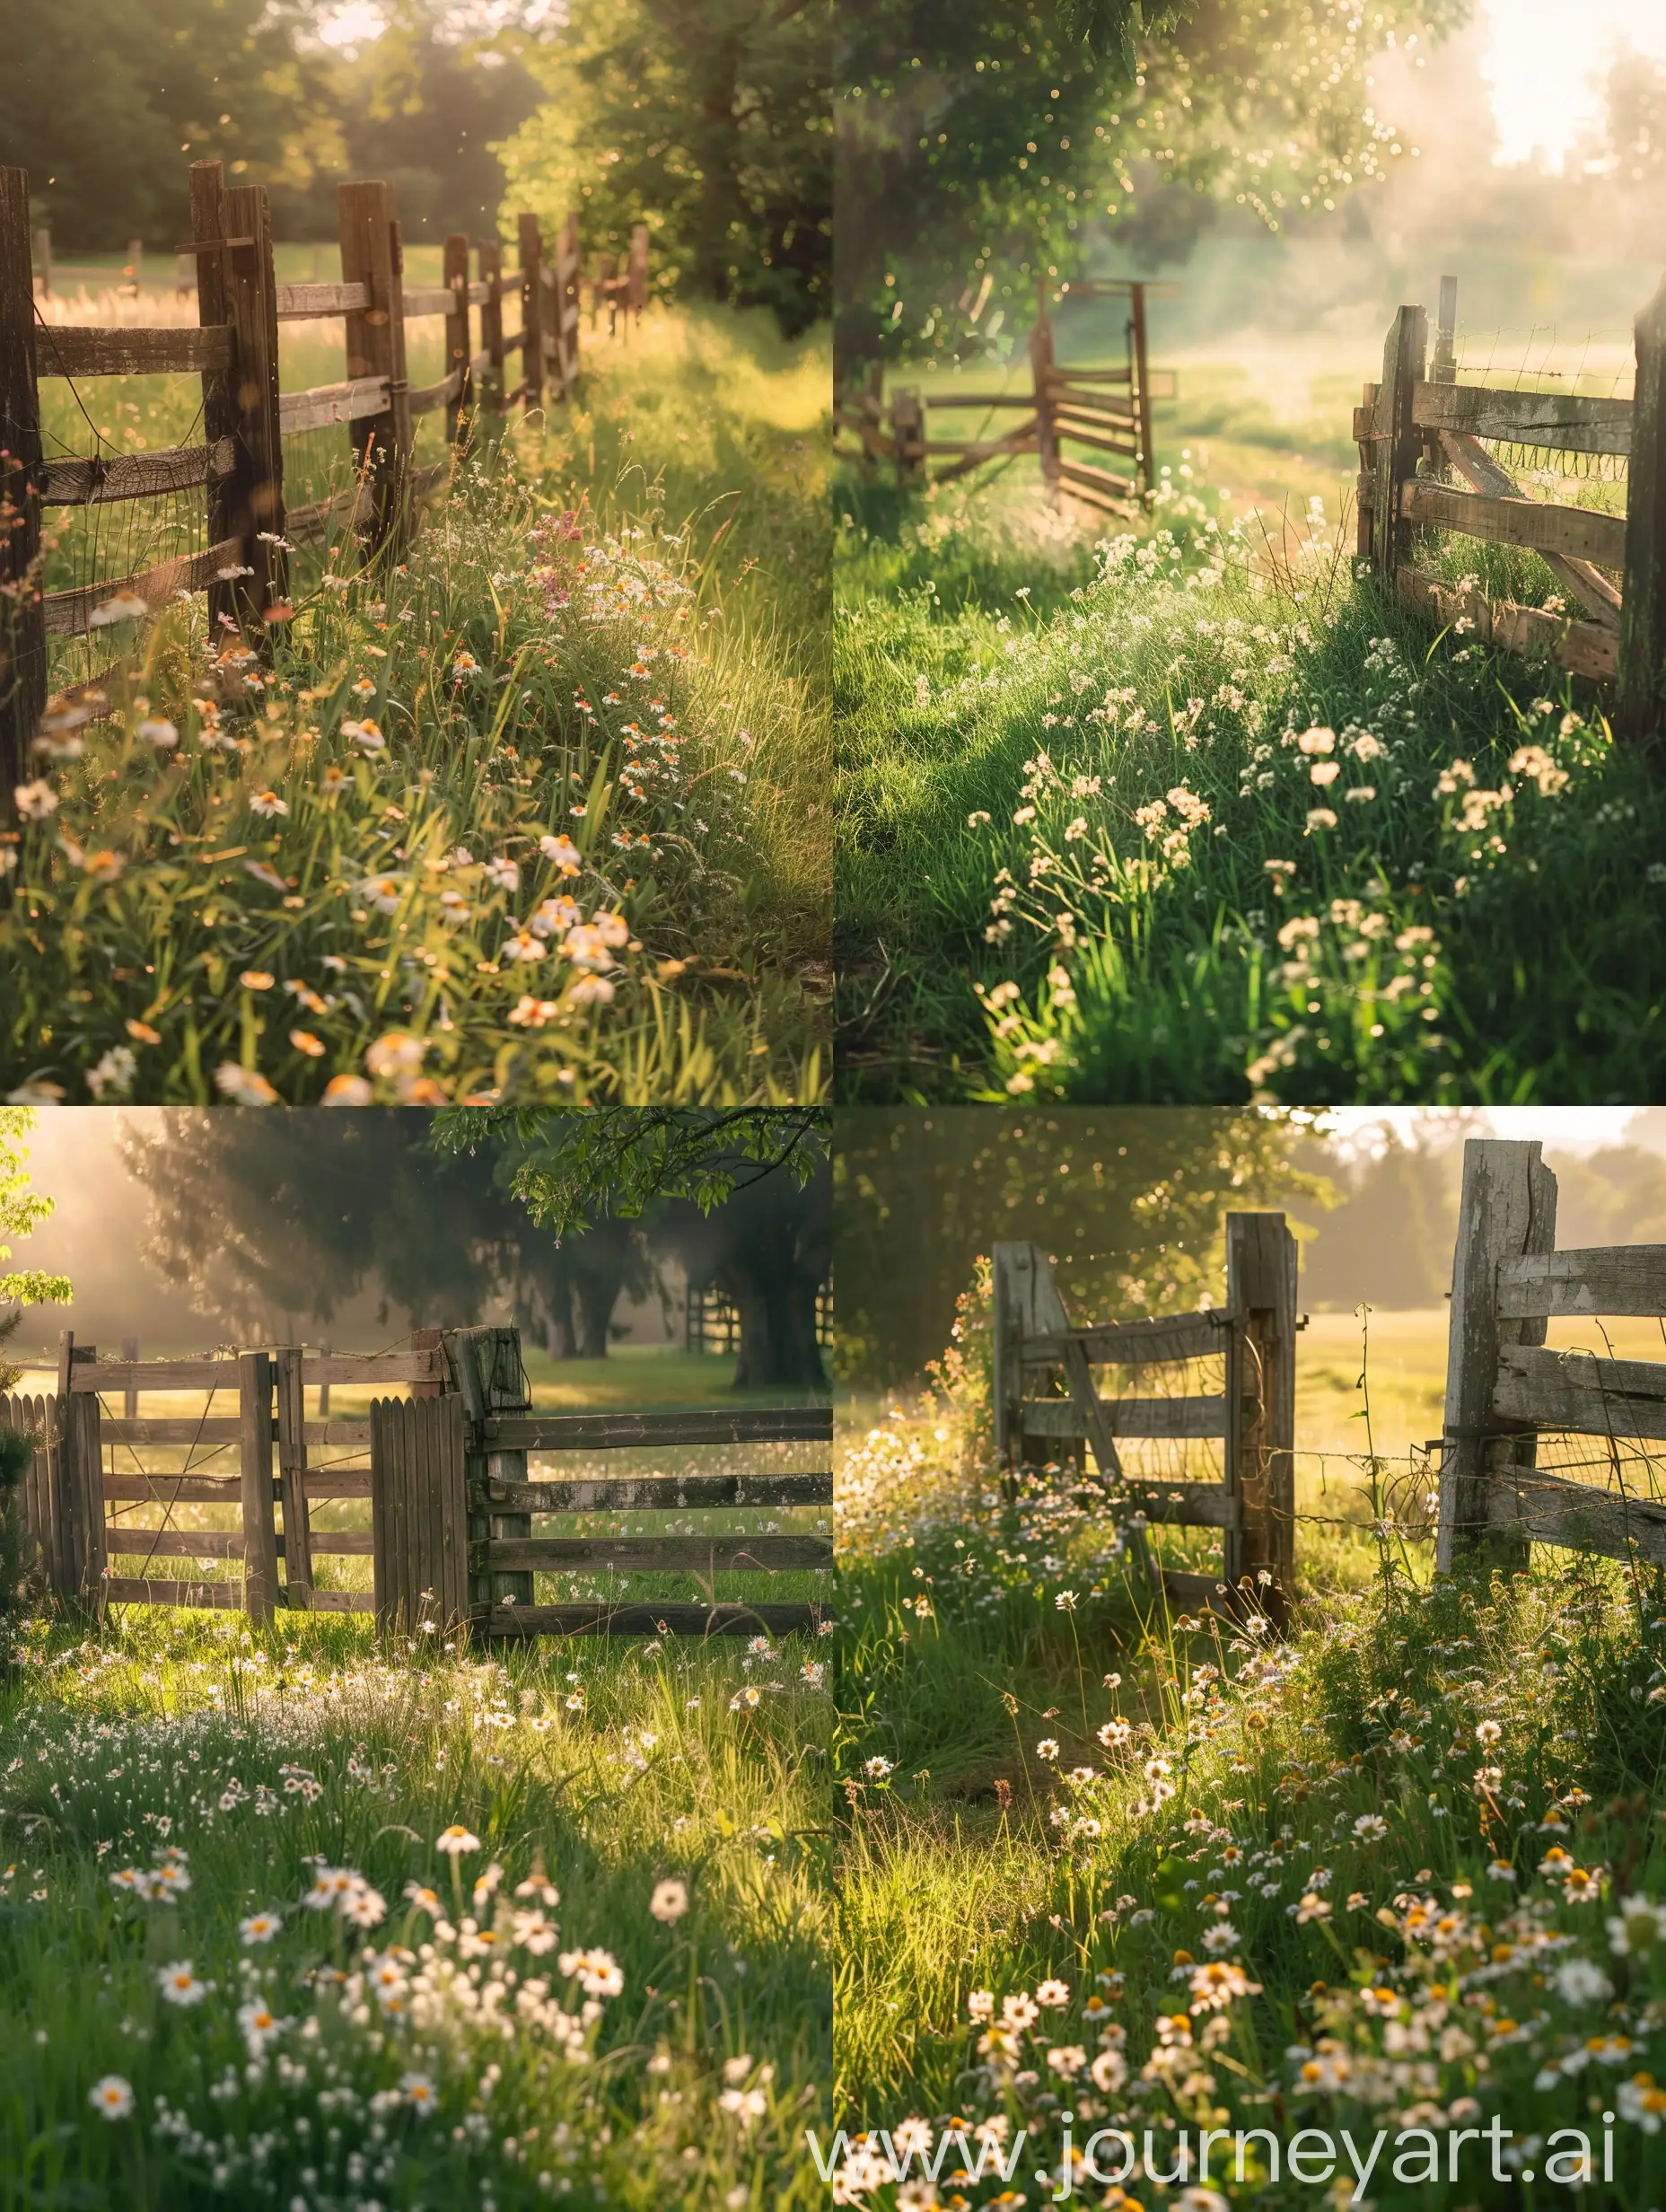 Scenic-Vintage-Farm-with-Wooden-Gates-and-Sunlit-Details